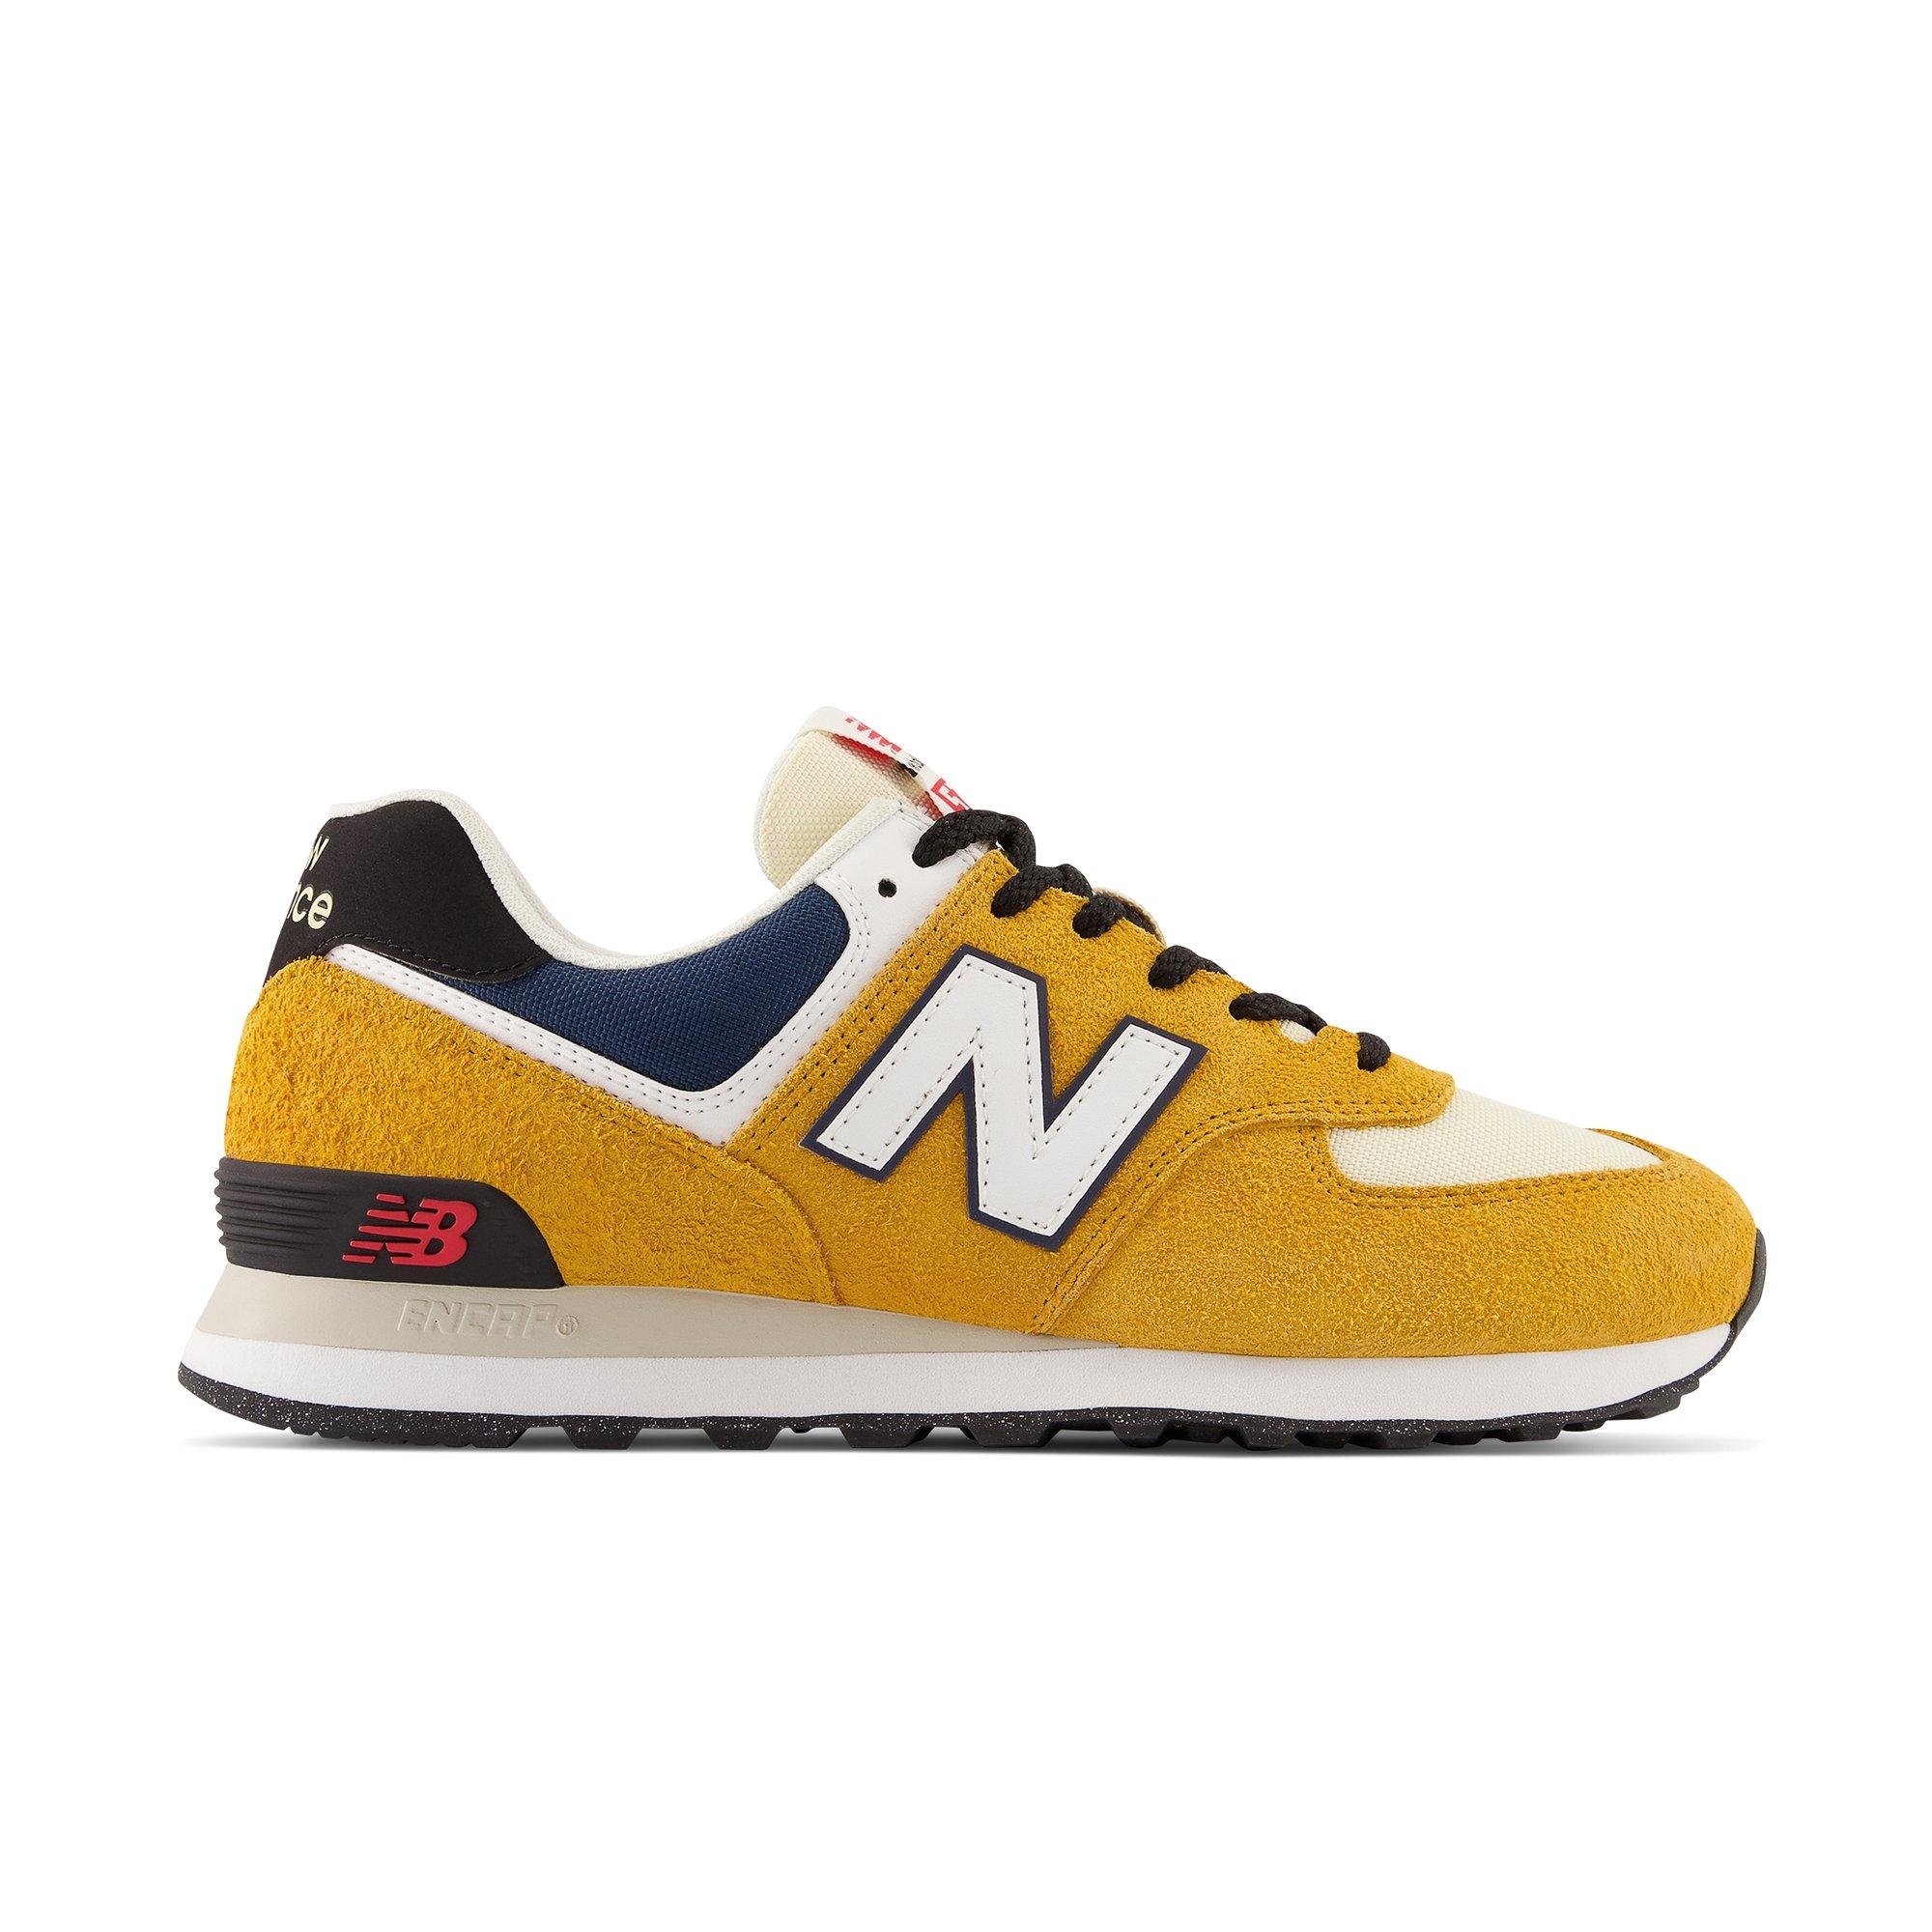 New Balance 574 Yellow Suede